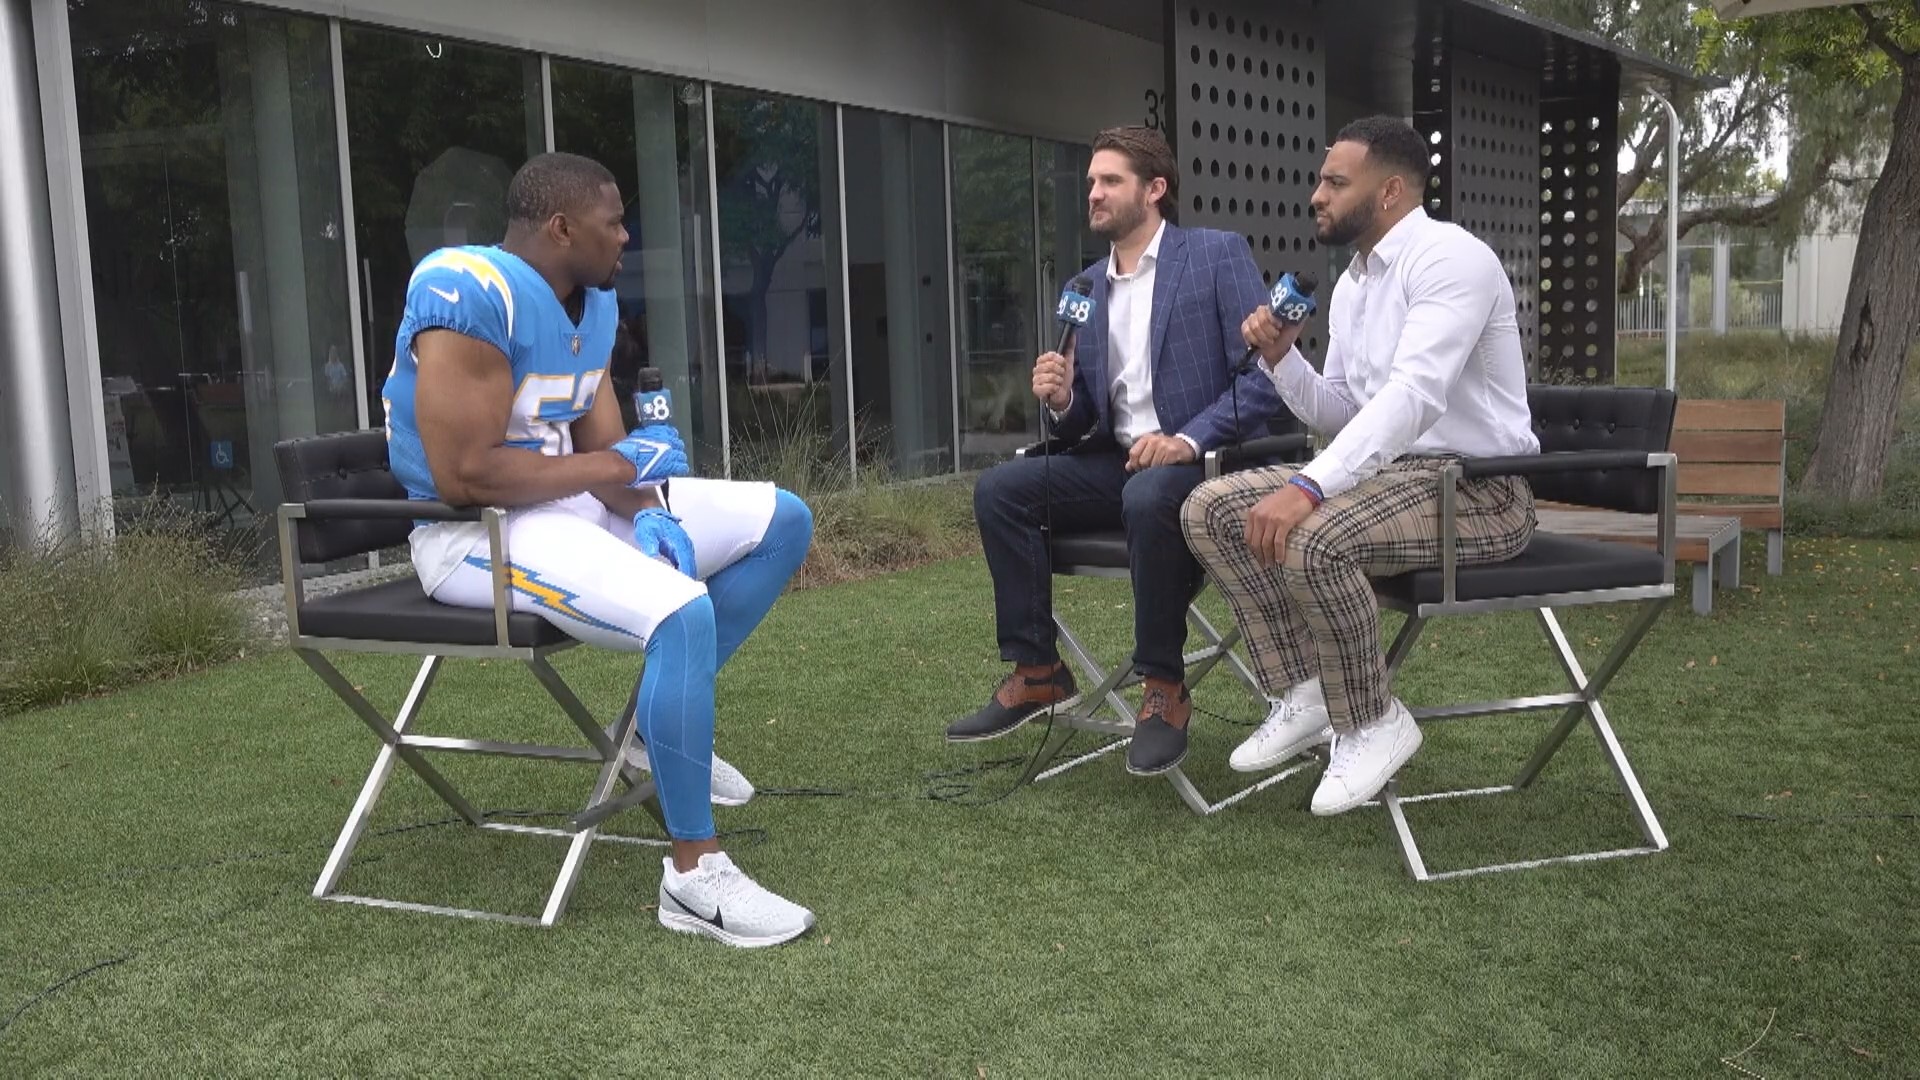 Marcus and Jake caught up with several Chargers players and discussed their expectations for the season and what it means to have a good roster on paper.